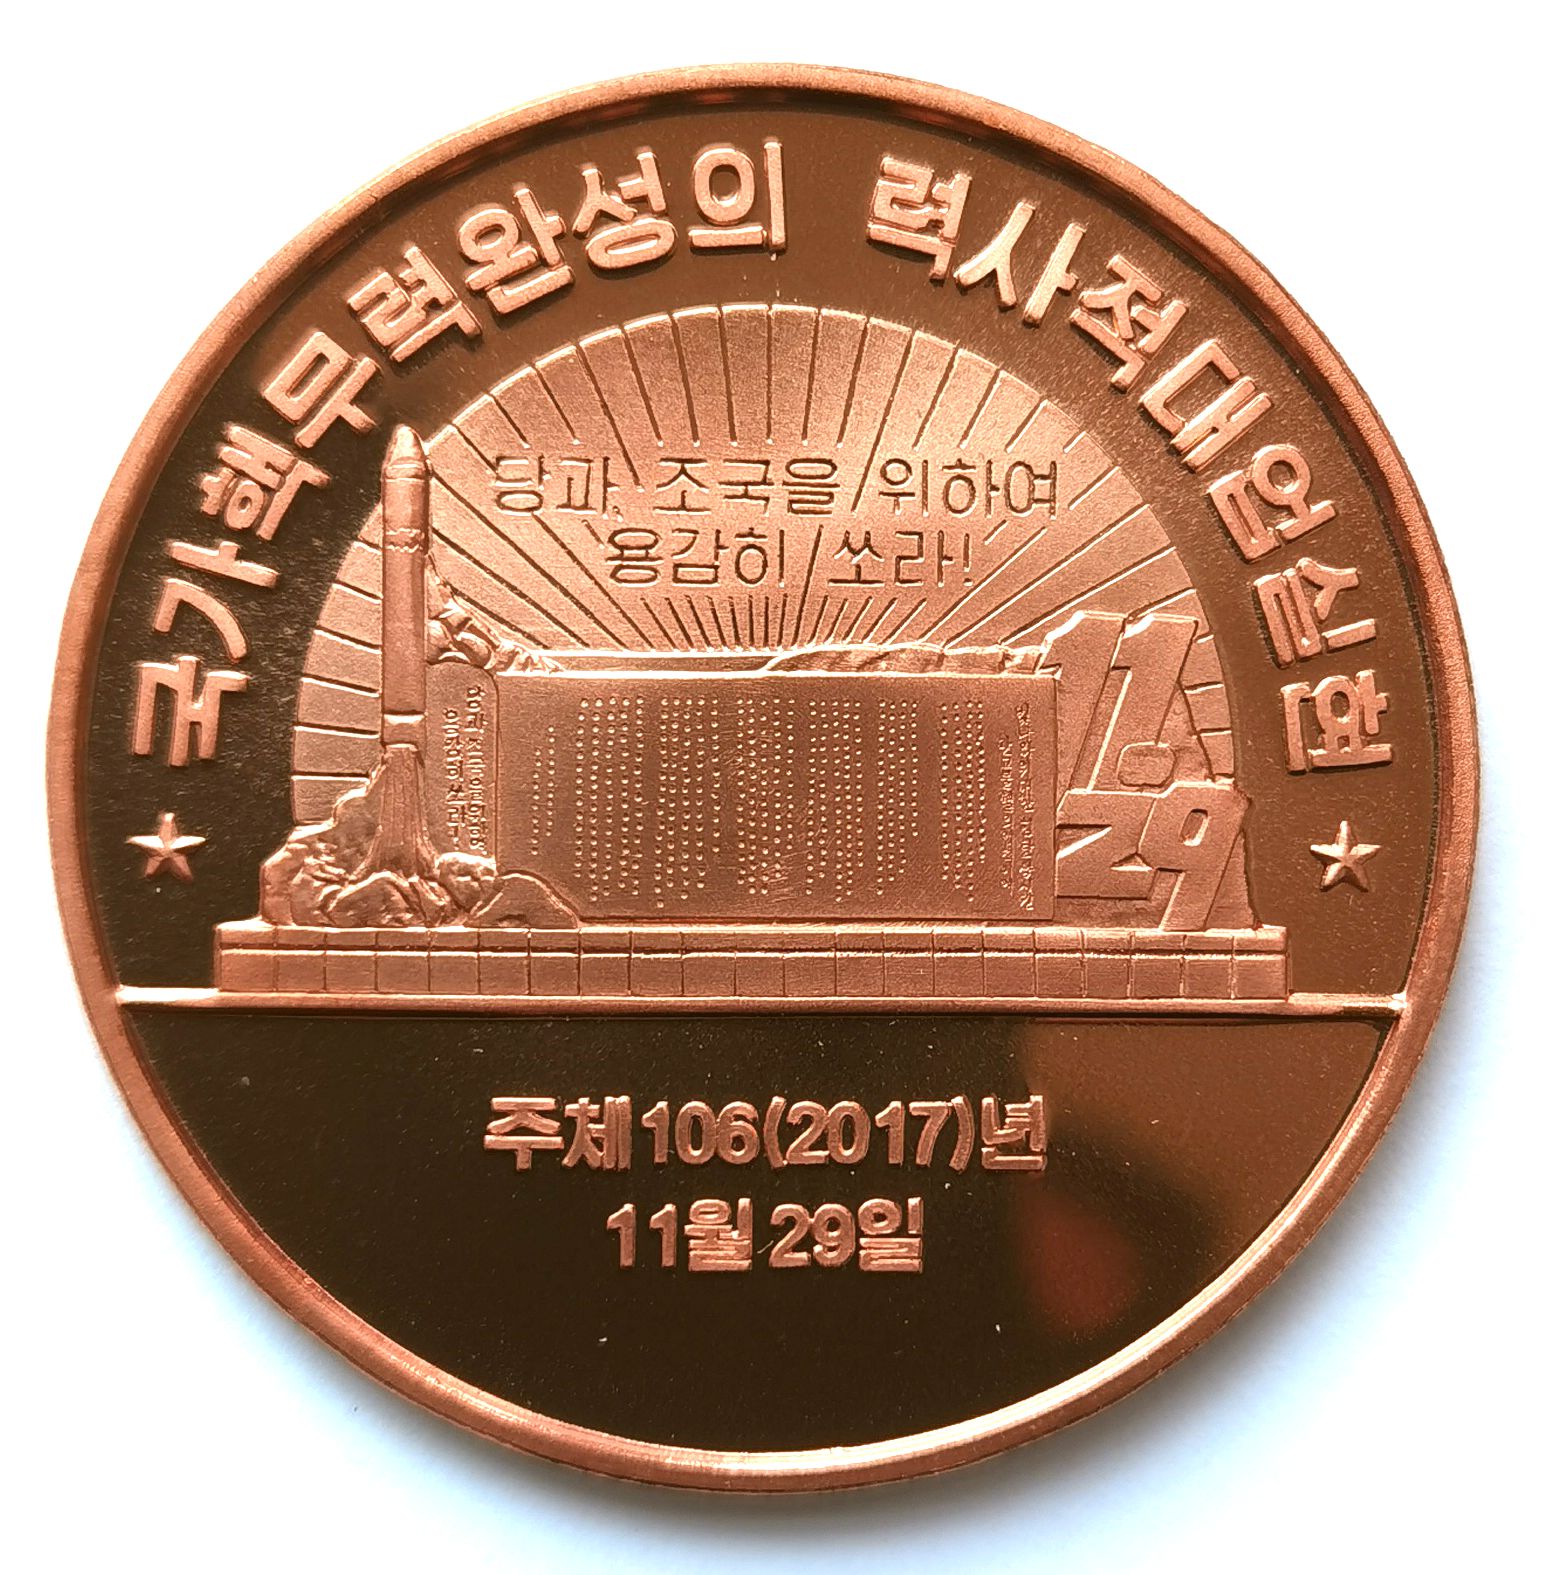 L7041, Korea “Nuclear Industry Weapon” Large Bronze Coin, 10 Won, 2019